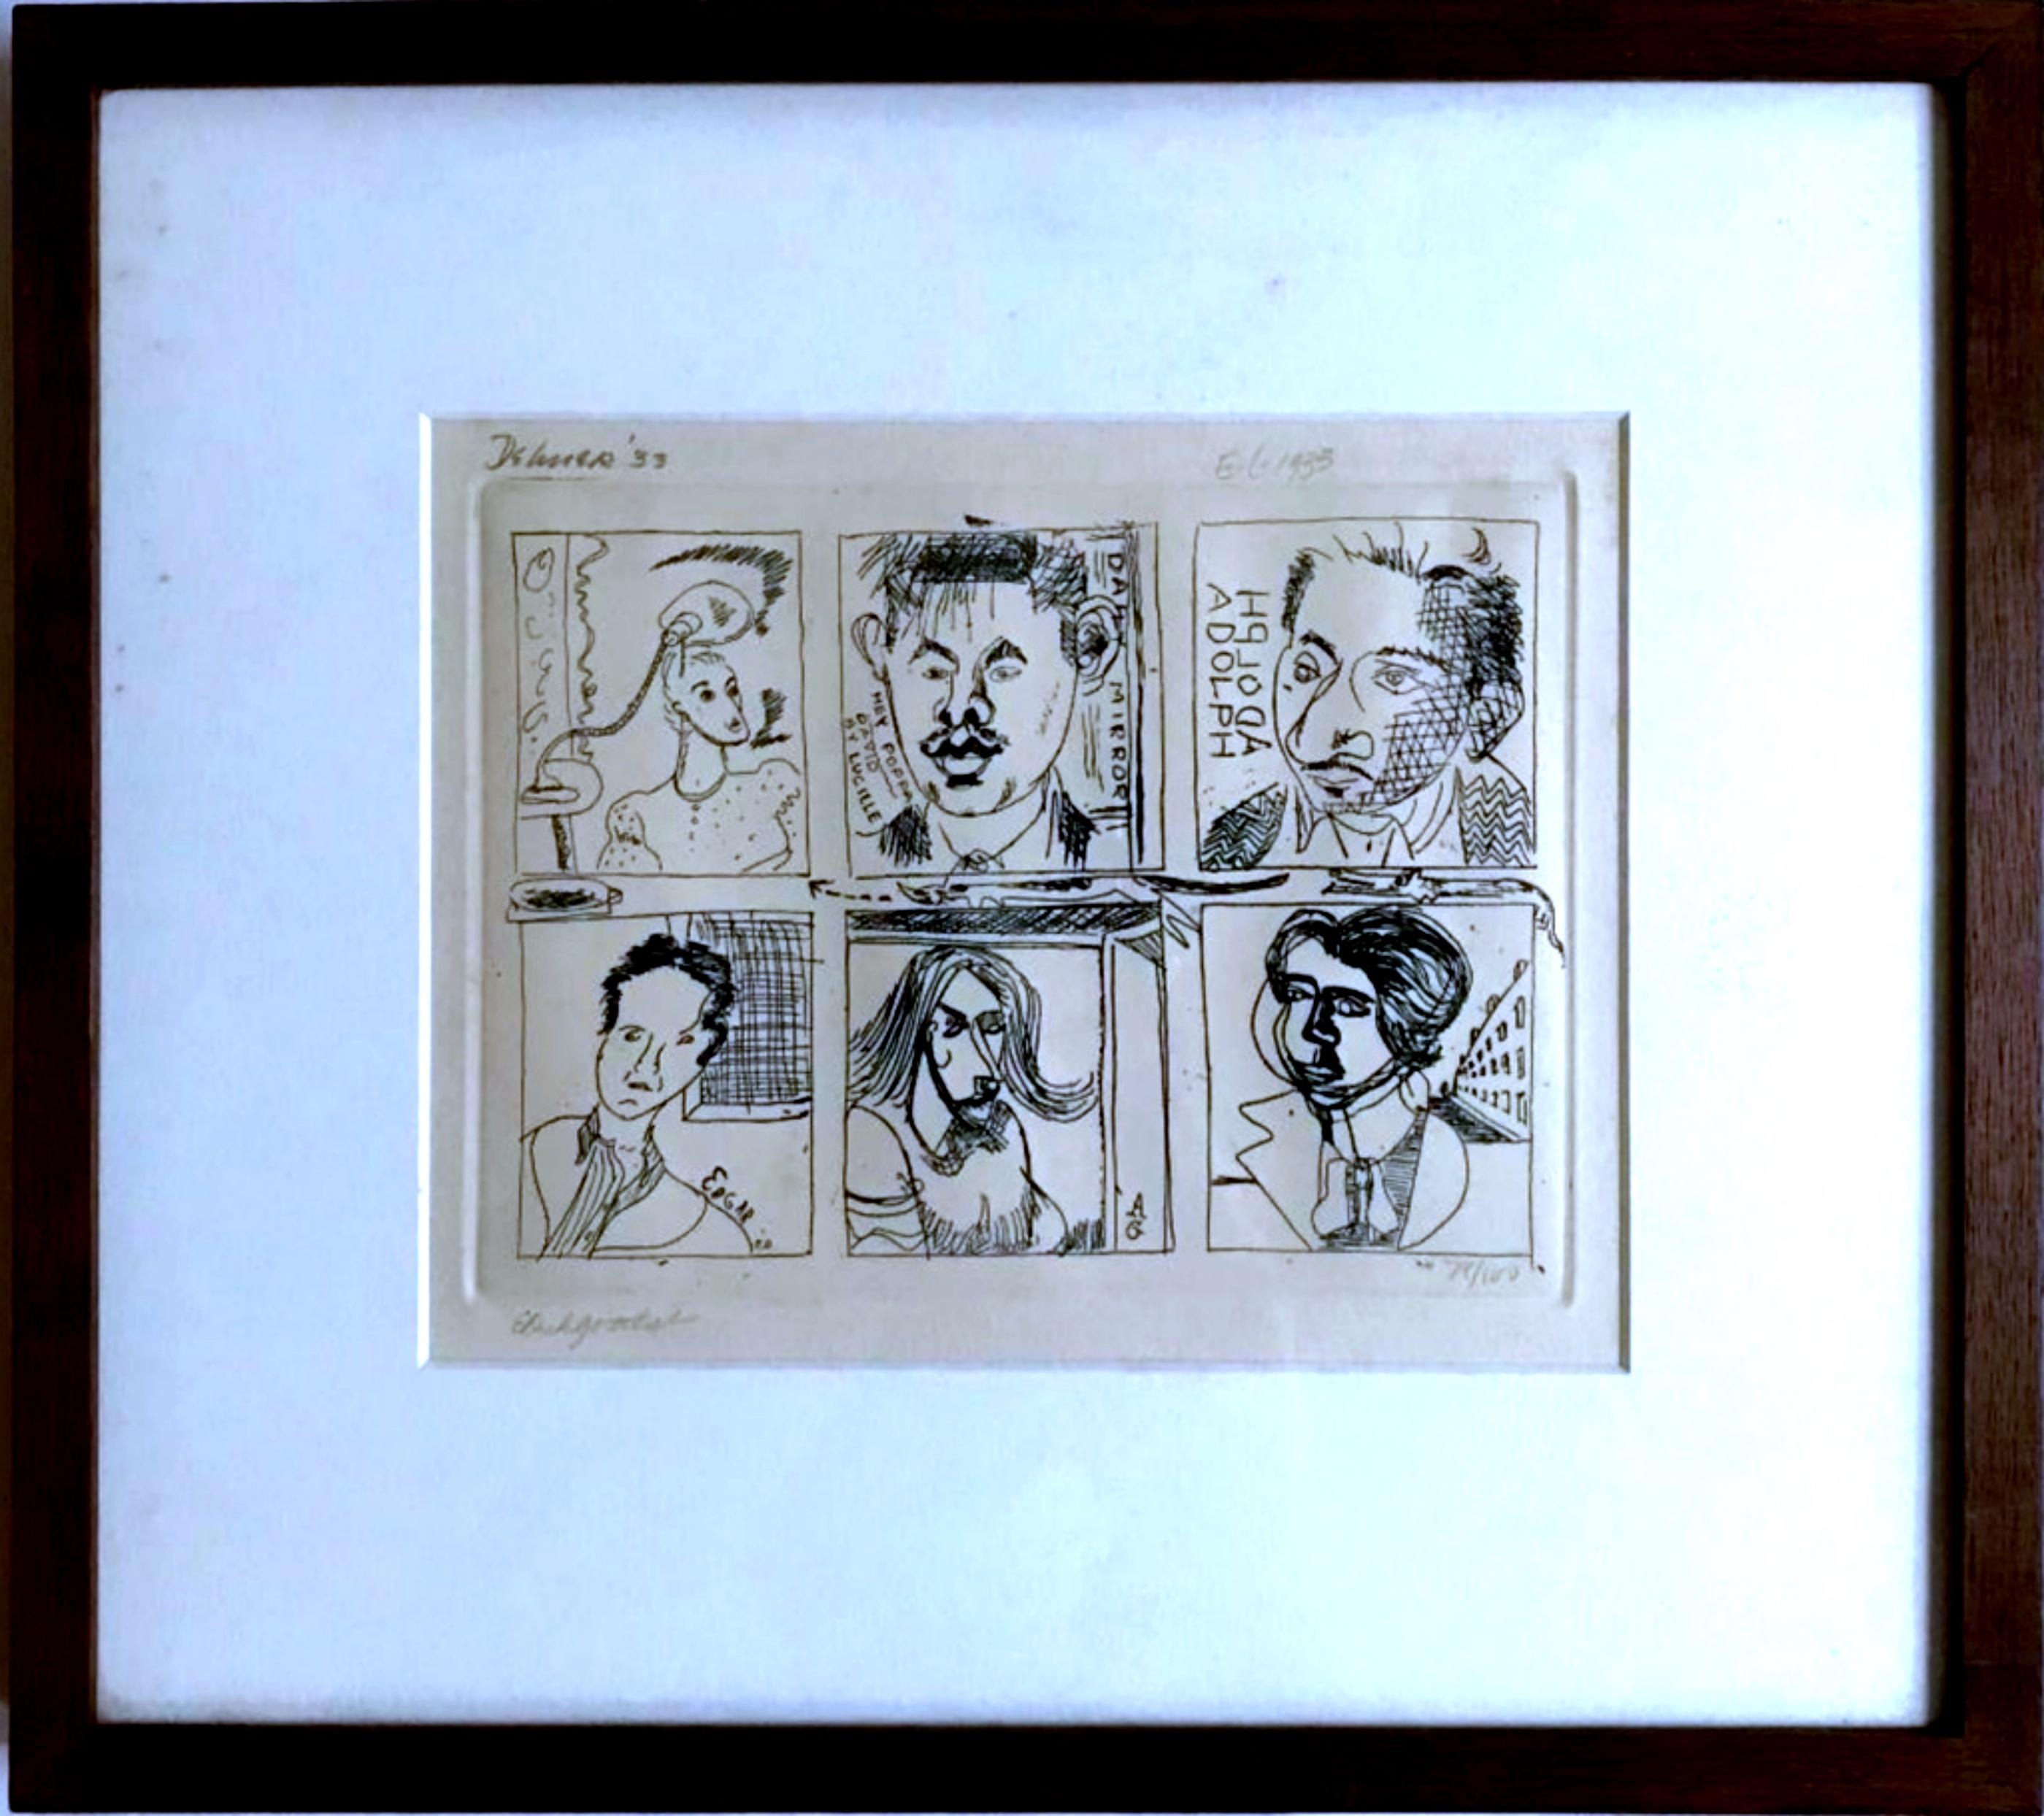 Collaborative Etching With 6 artist (Hand Signed by 3 artists) - Print by Adolph Gottlieb